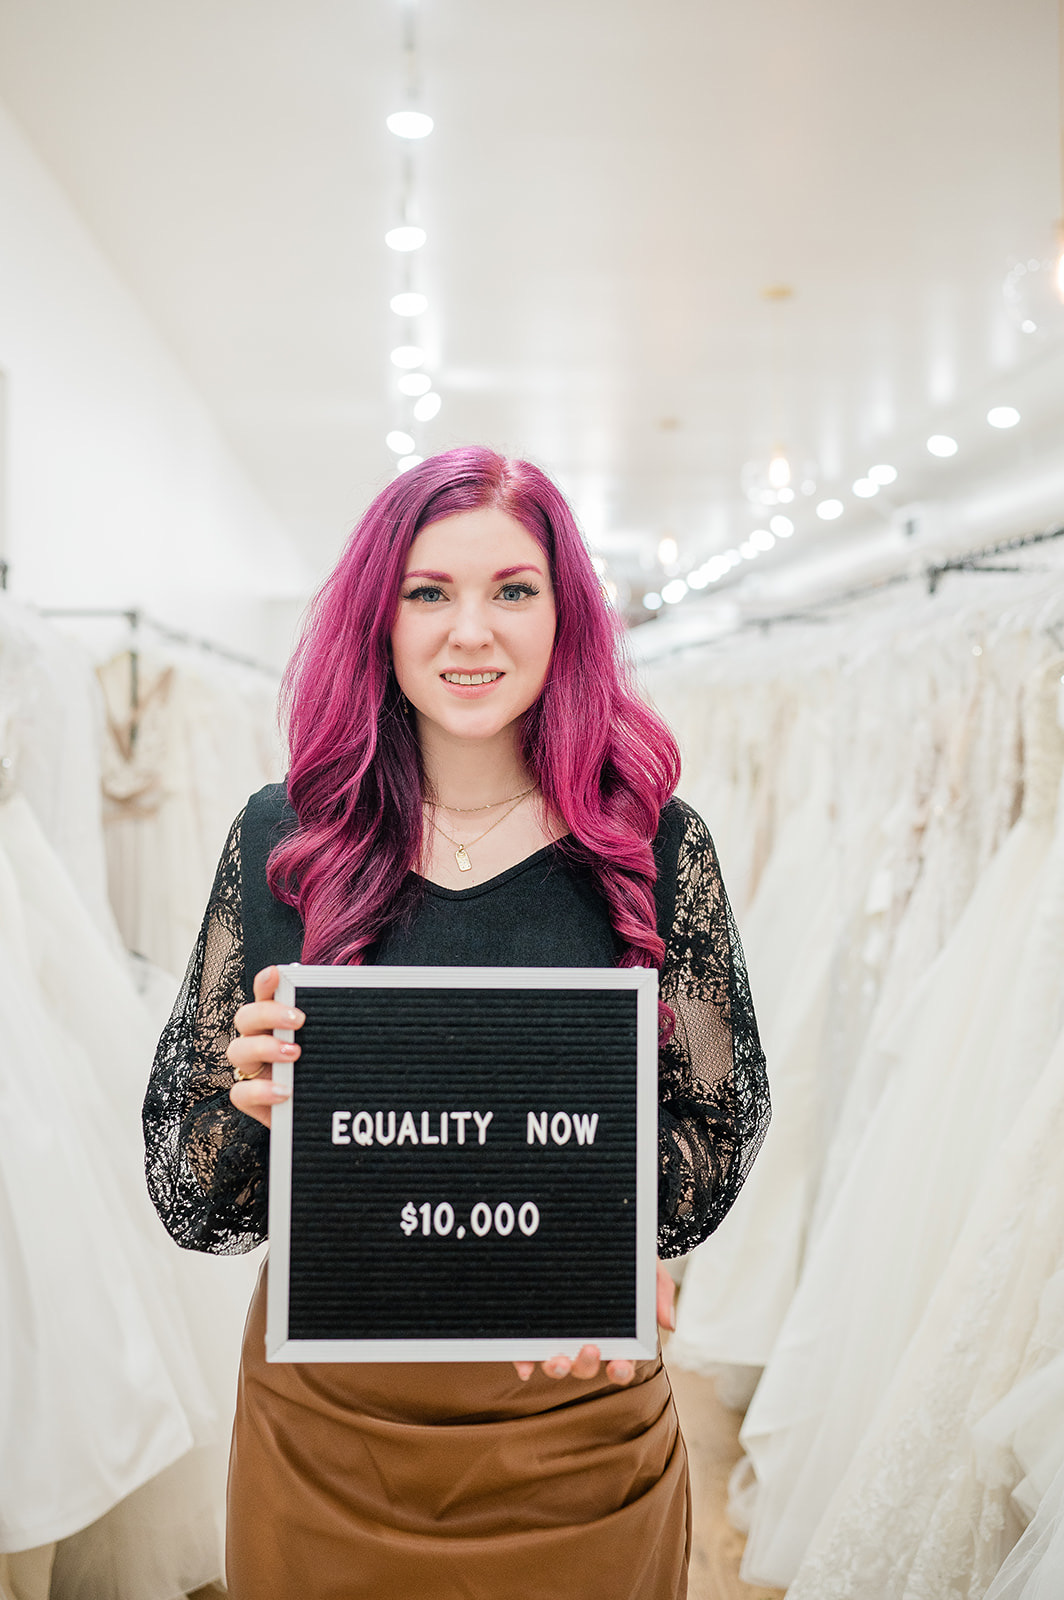 2022 Gift of $10,000 to Equality Now!